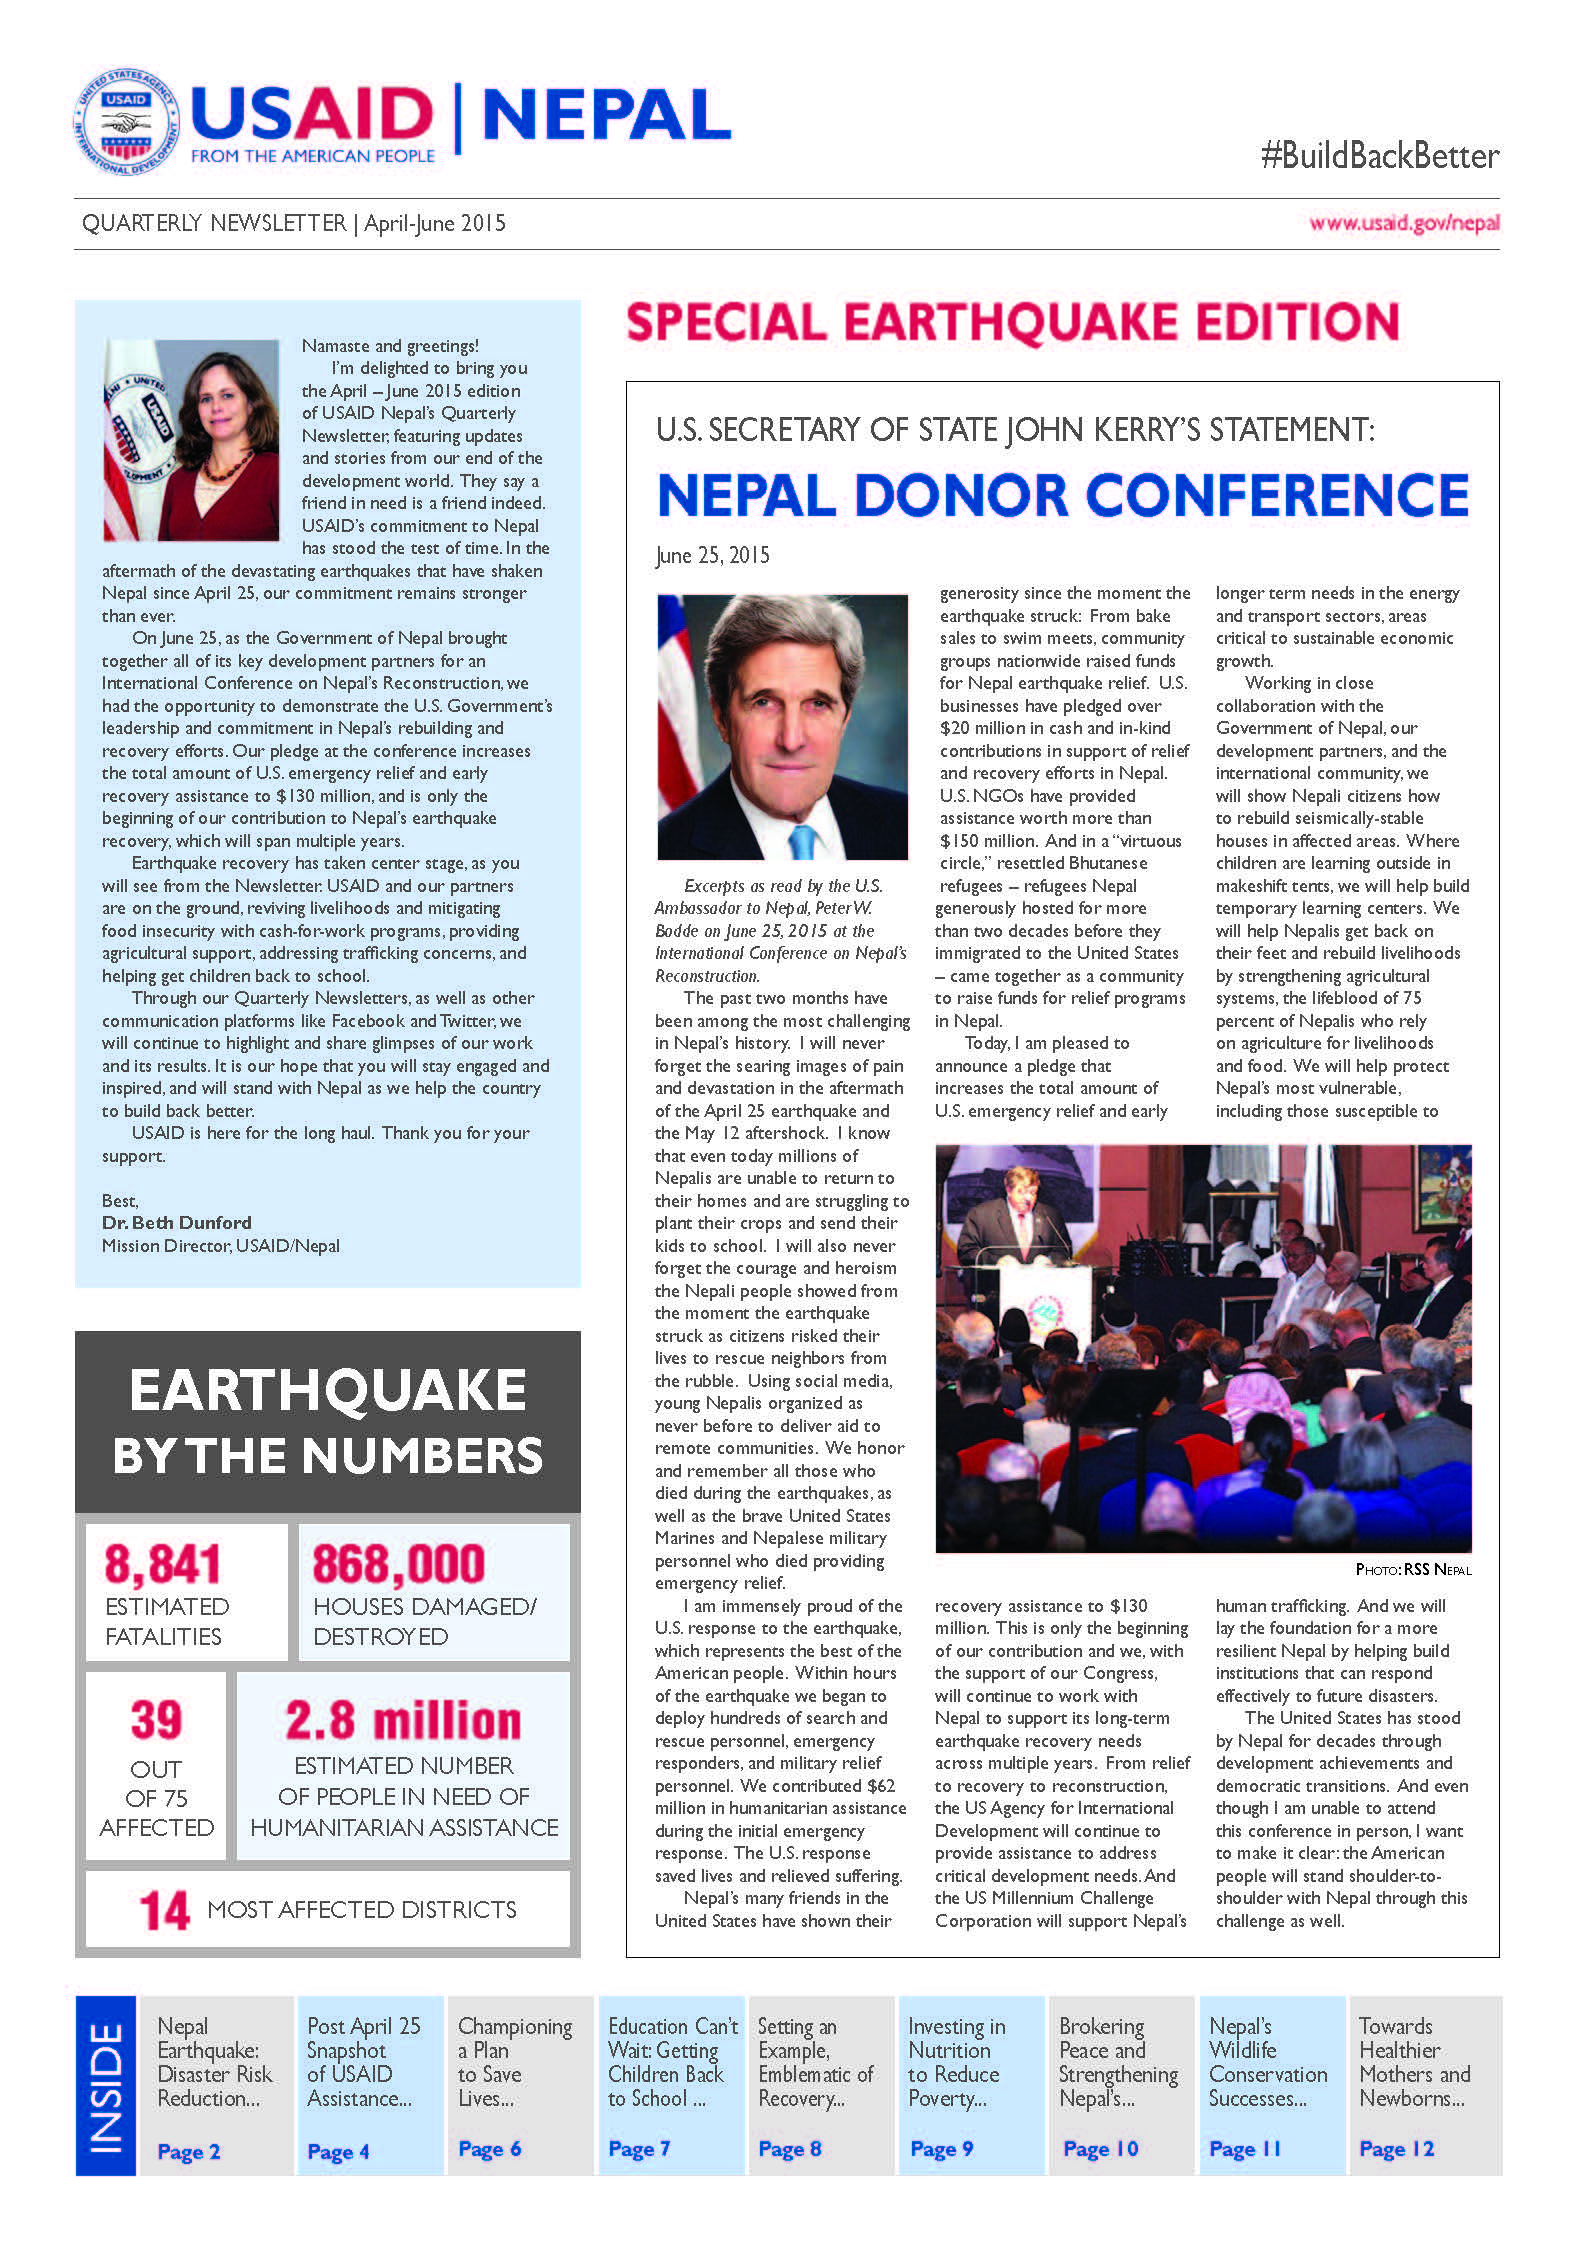 USAID NEPAL QUARTERLY NEWSLETTER: APRIL TO JUNE, 2015